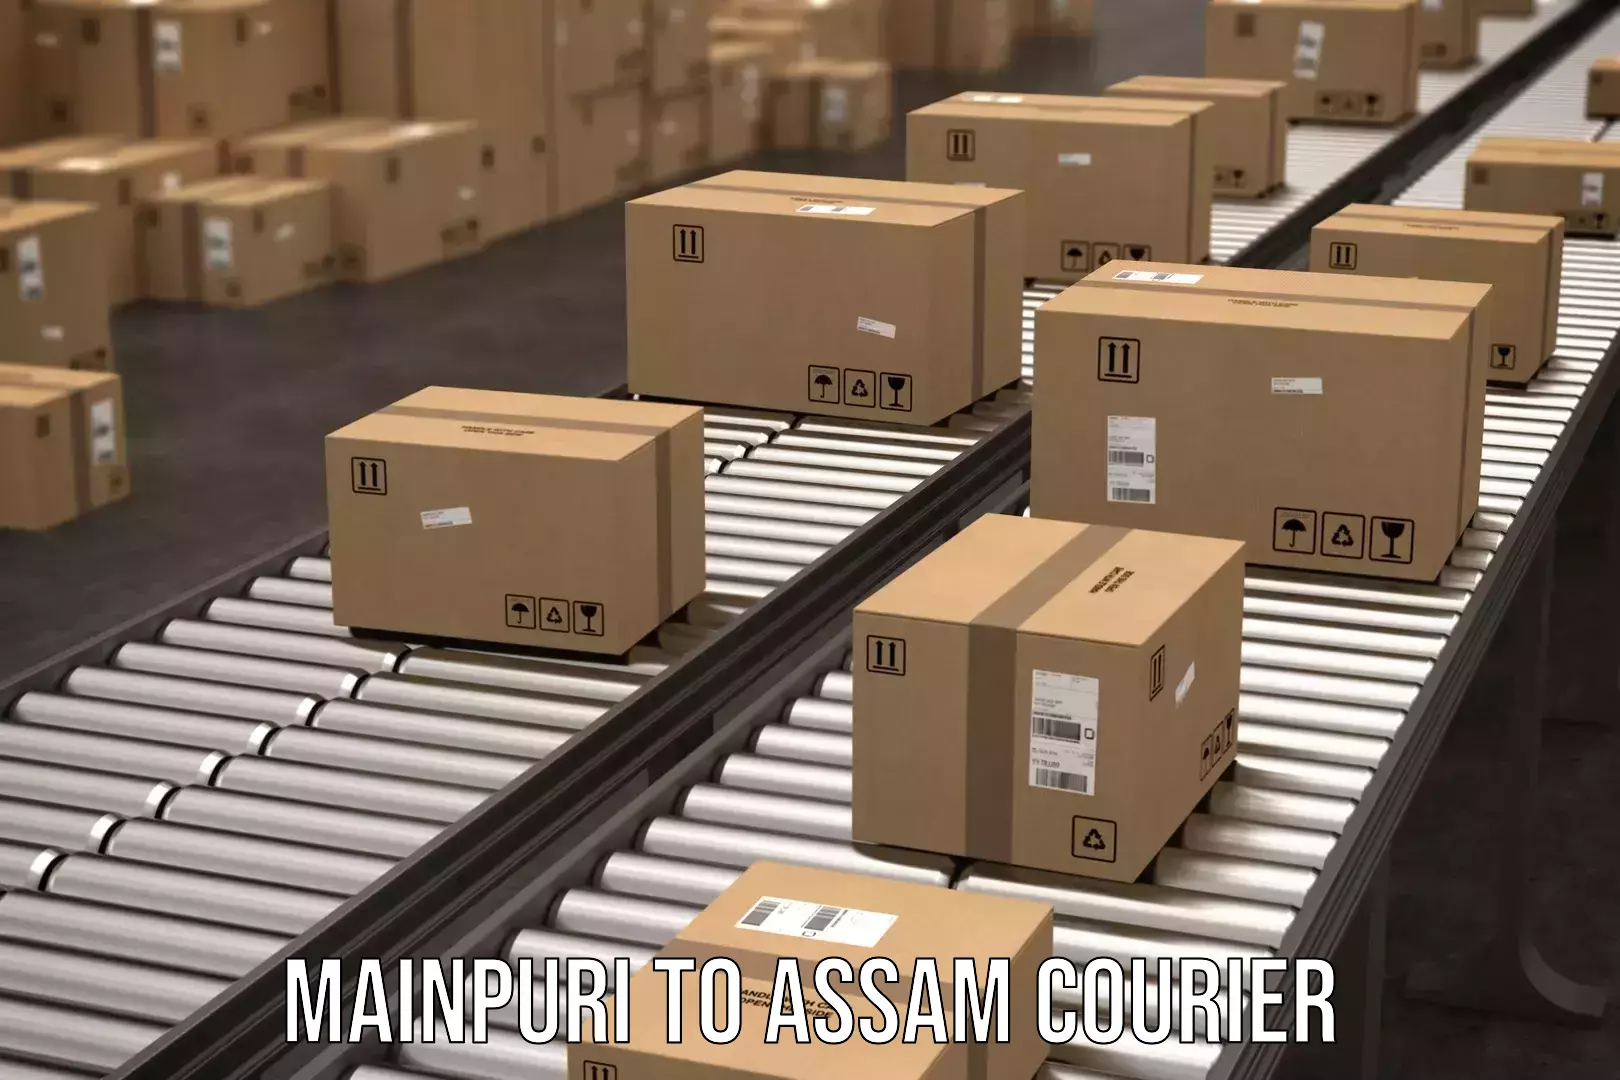 Express delivery network Mainpuri to Assam